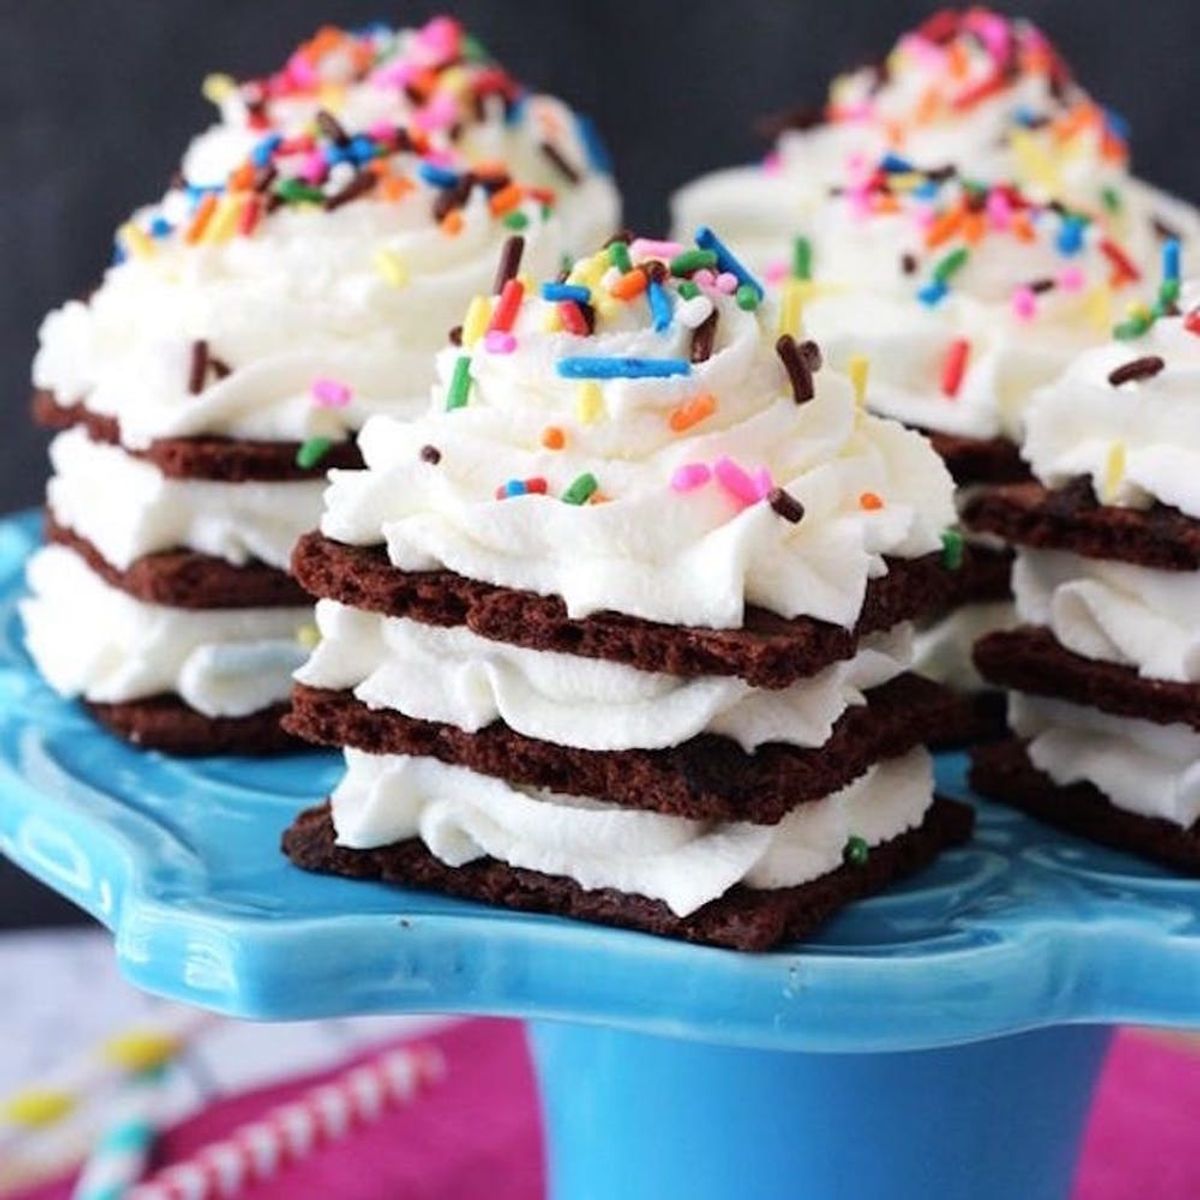 9 No-Bake Icebox Cakes for Your Next Party